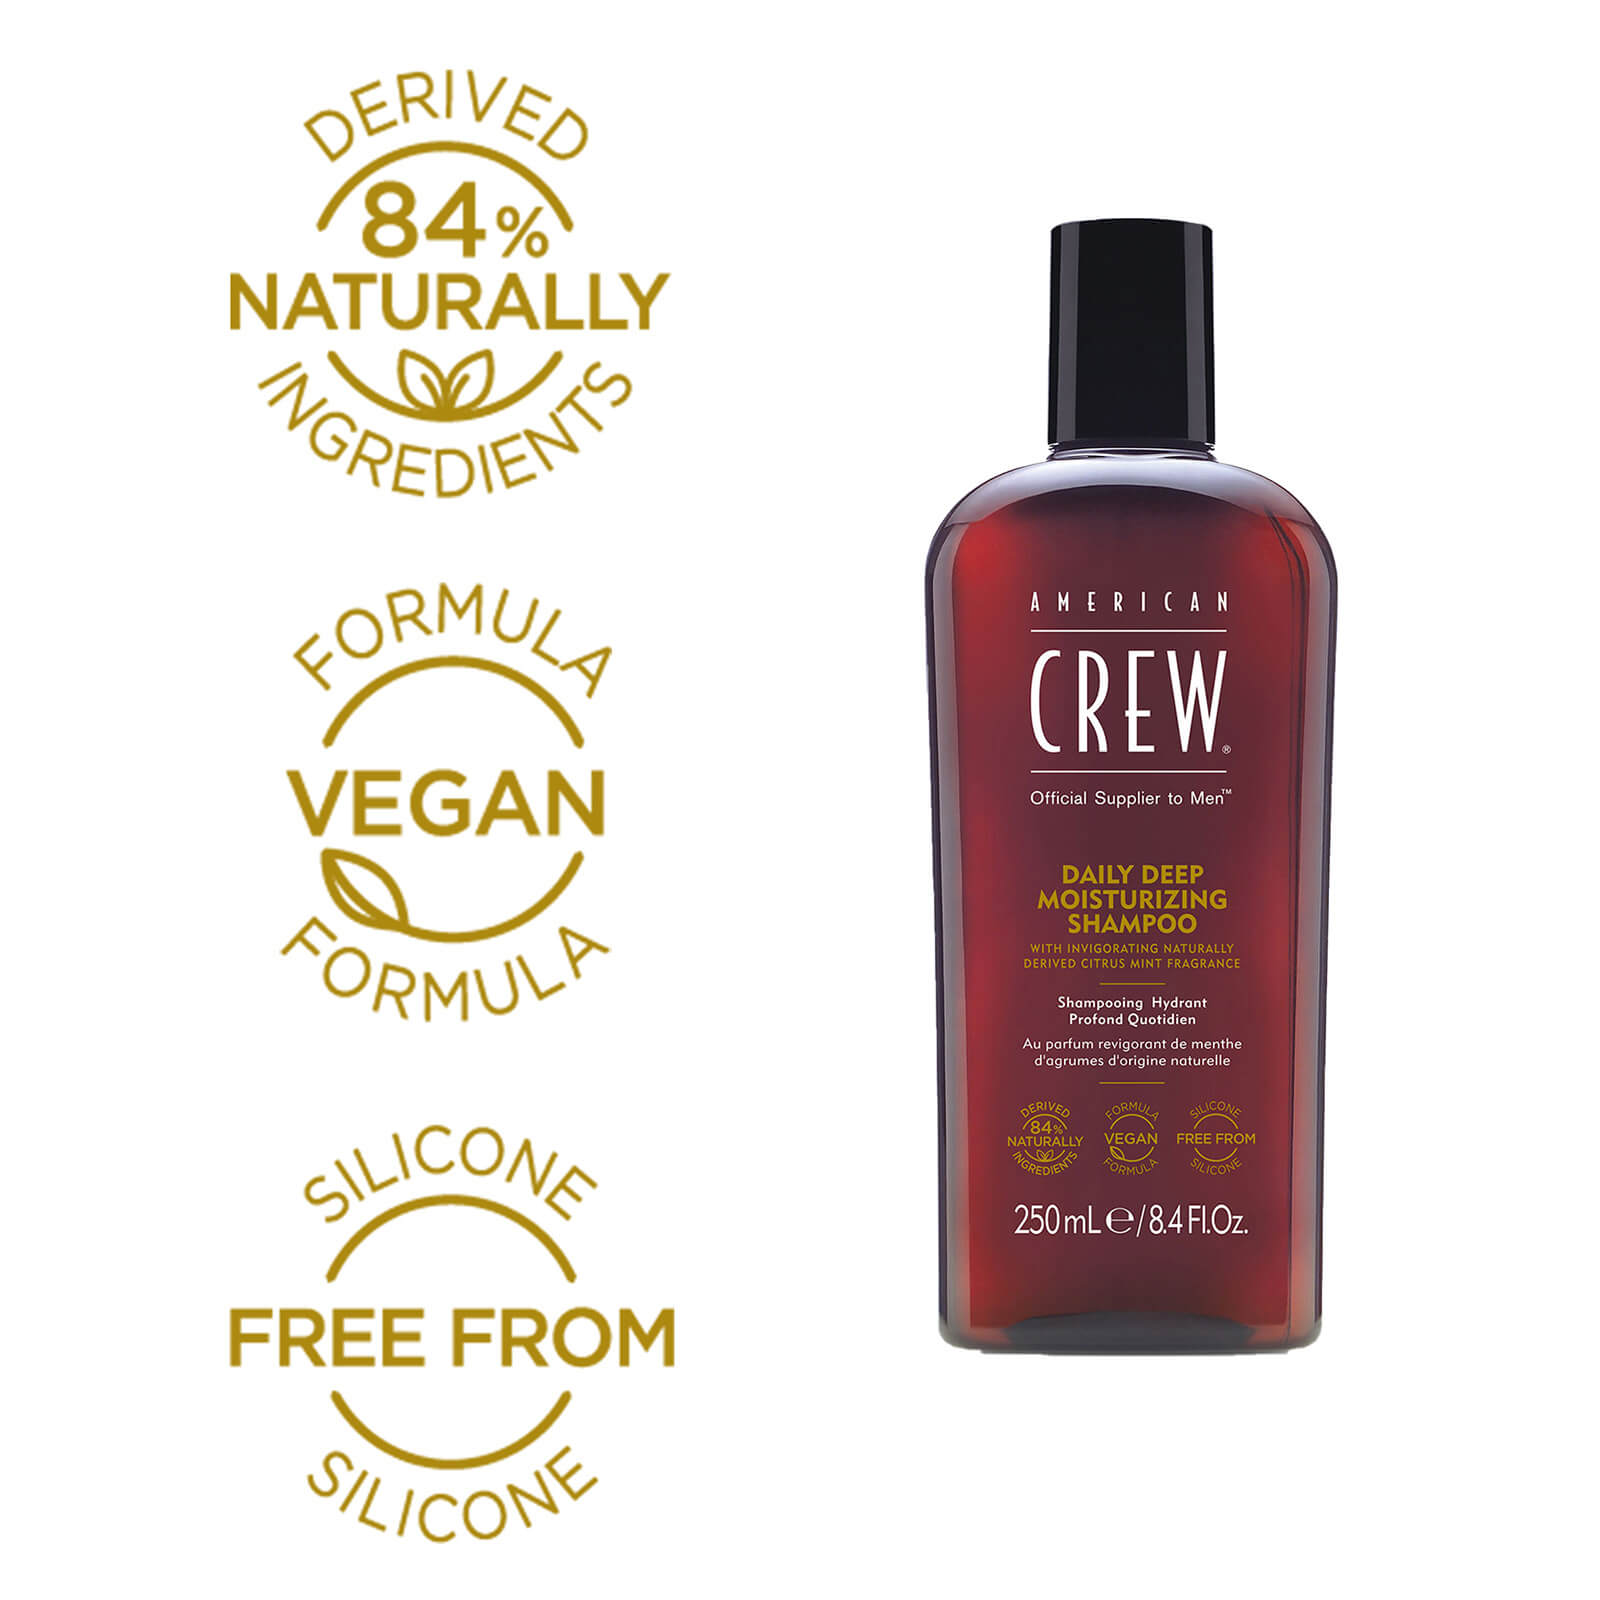 Naturally Ingredients.Vegan formula.Free from silicone